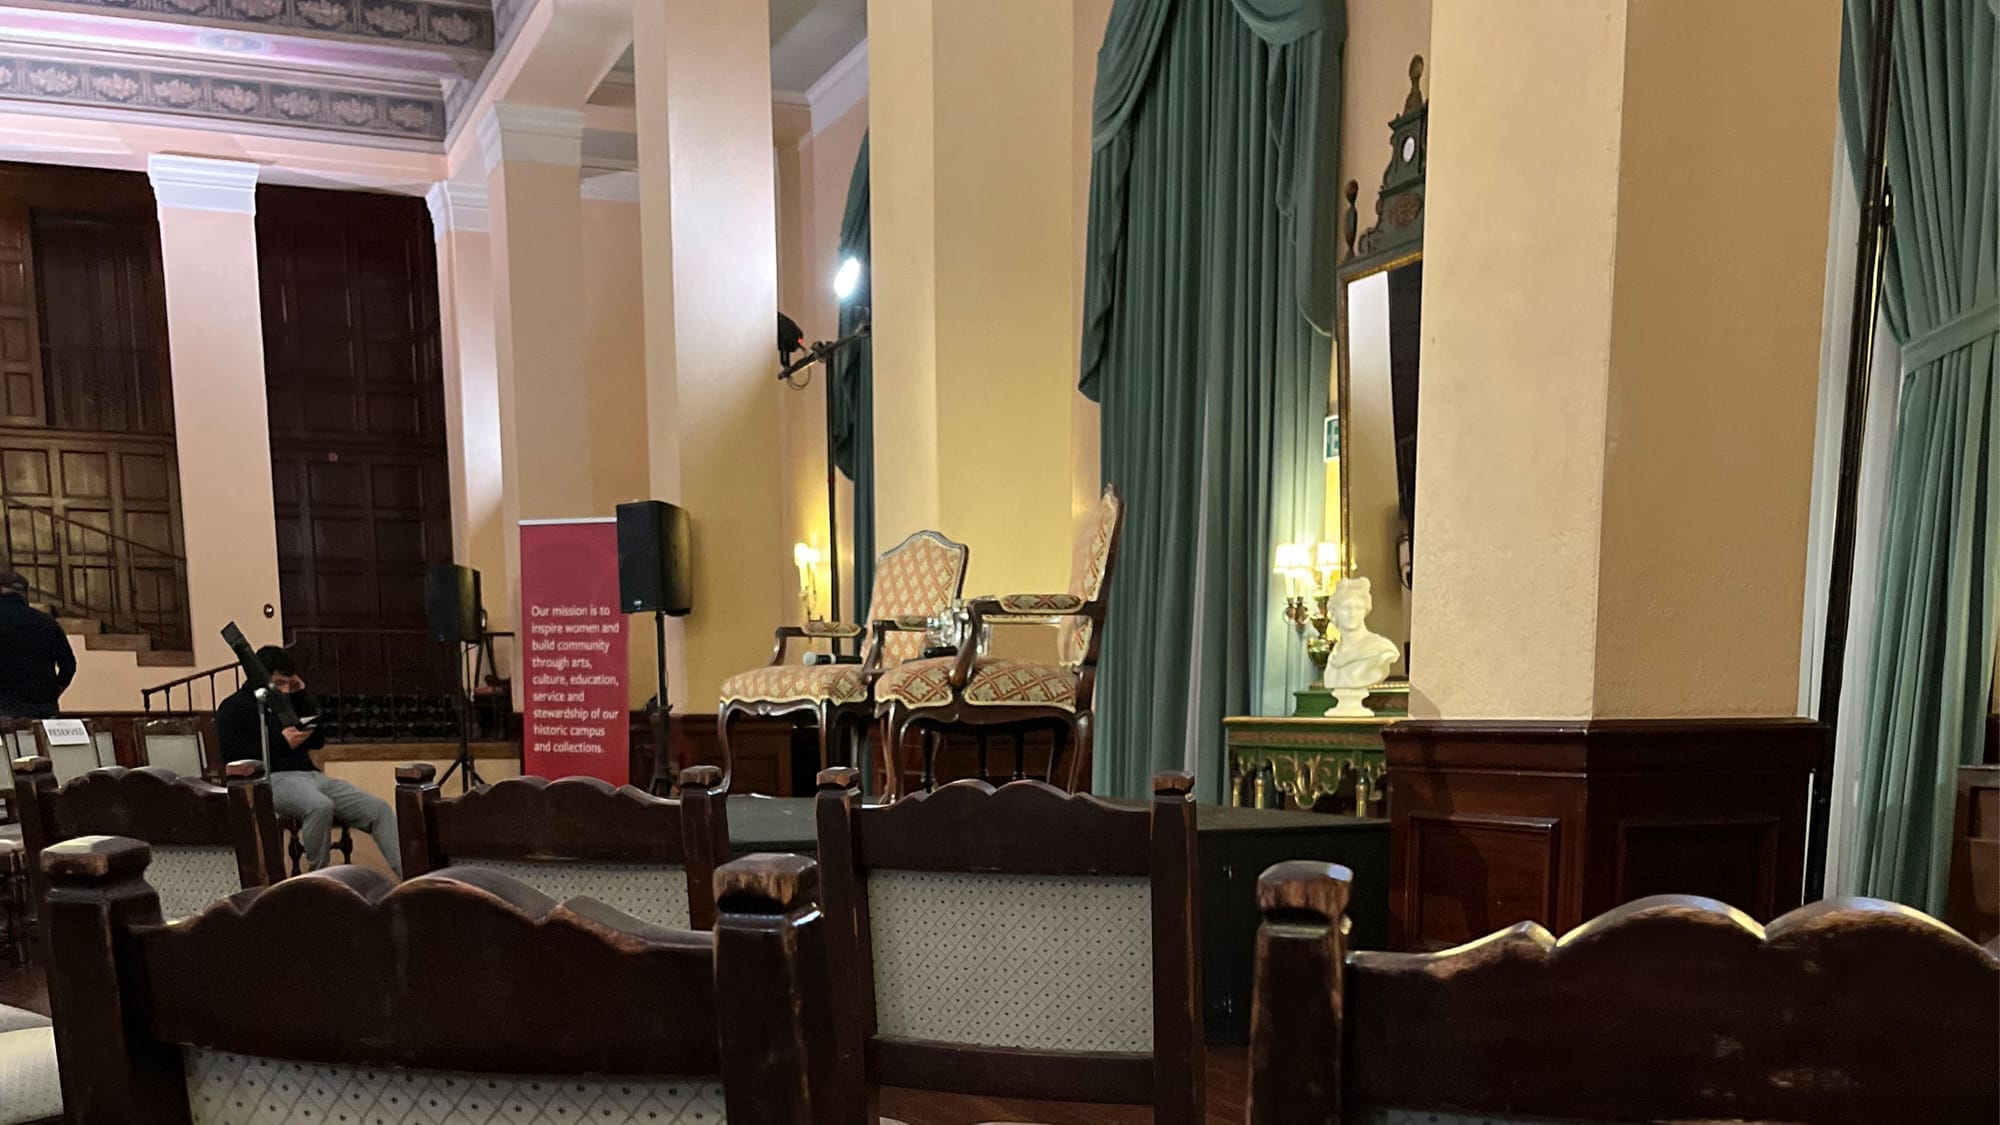 An elegant gathering about to begin at the Ebell Theater, a classic LA landmark, with two upholstered French armchairs on a dais awaiting speakers and audience chairs set up below